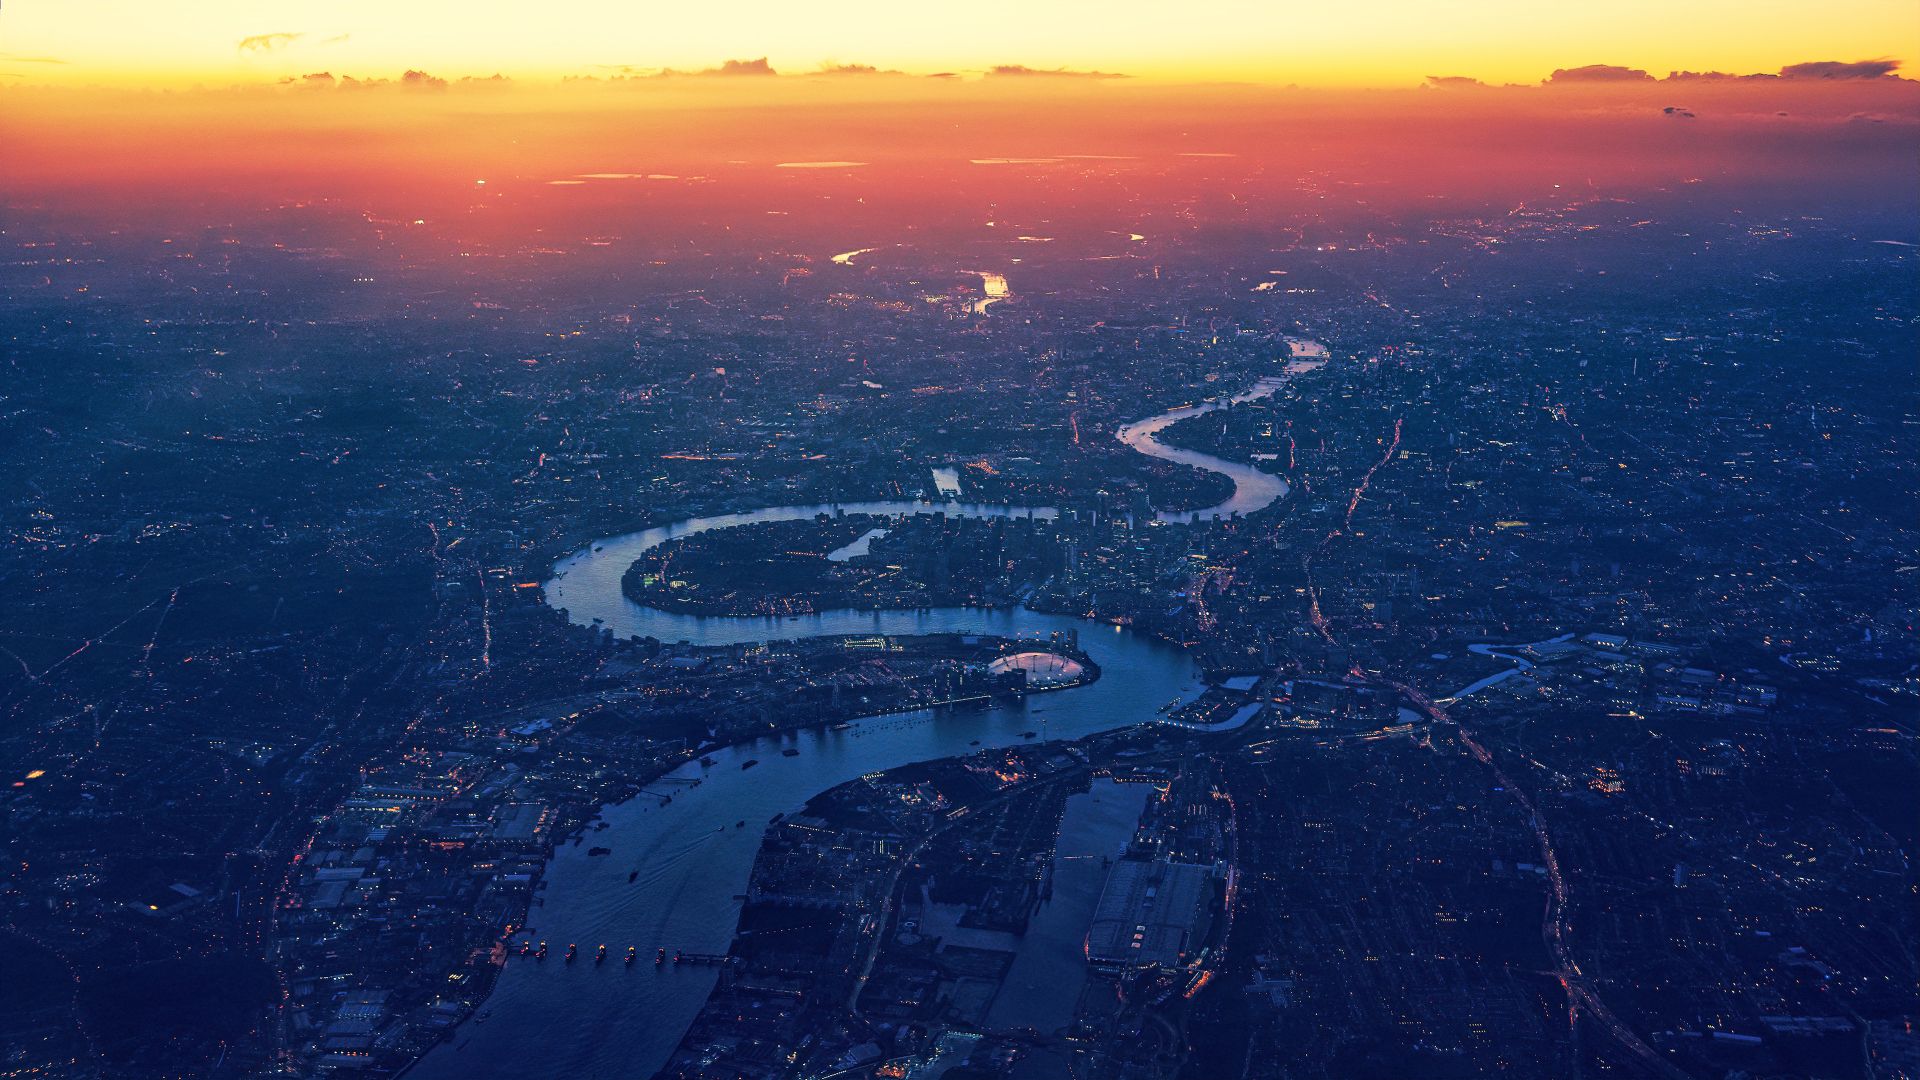 River Thames London Aerial View 1080P Laptop Full HD Wallpaper, HD City 4K Wallpaper, Image, Photo and Background